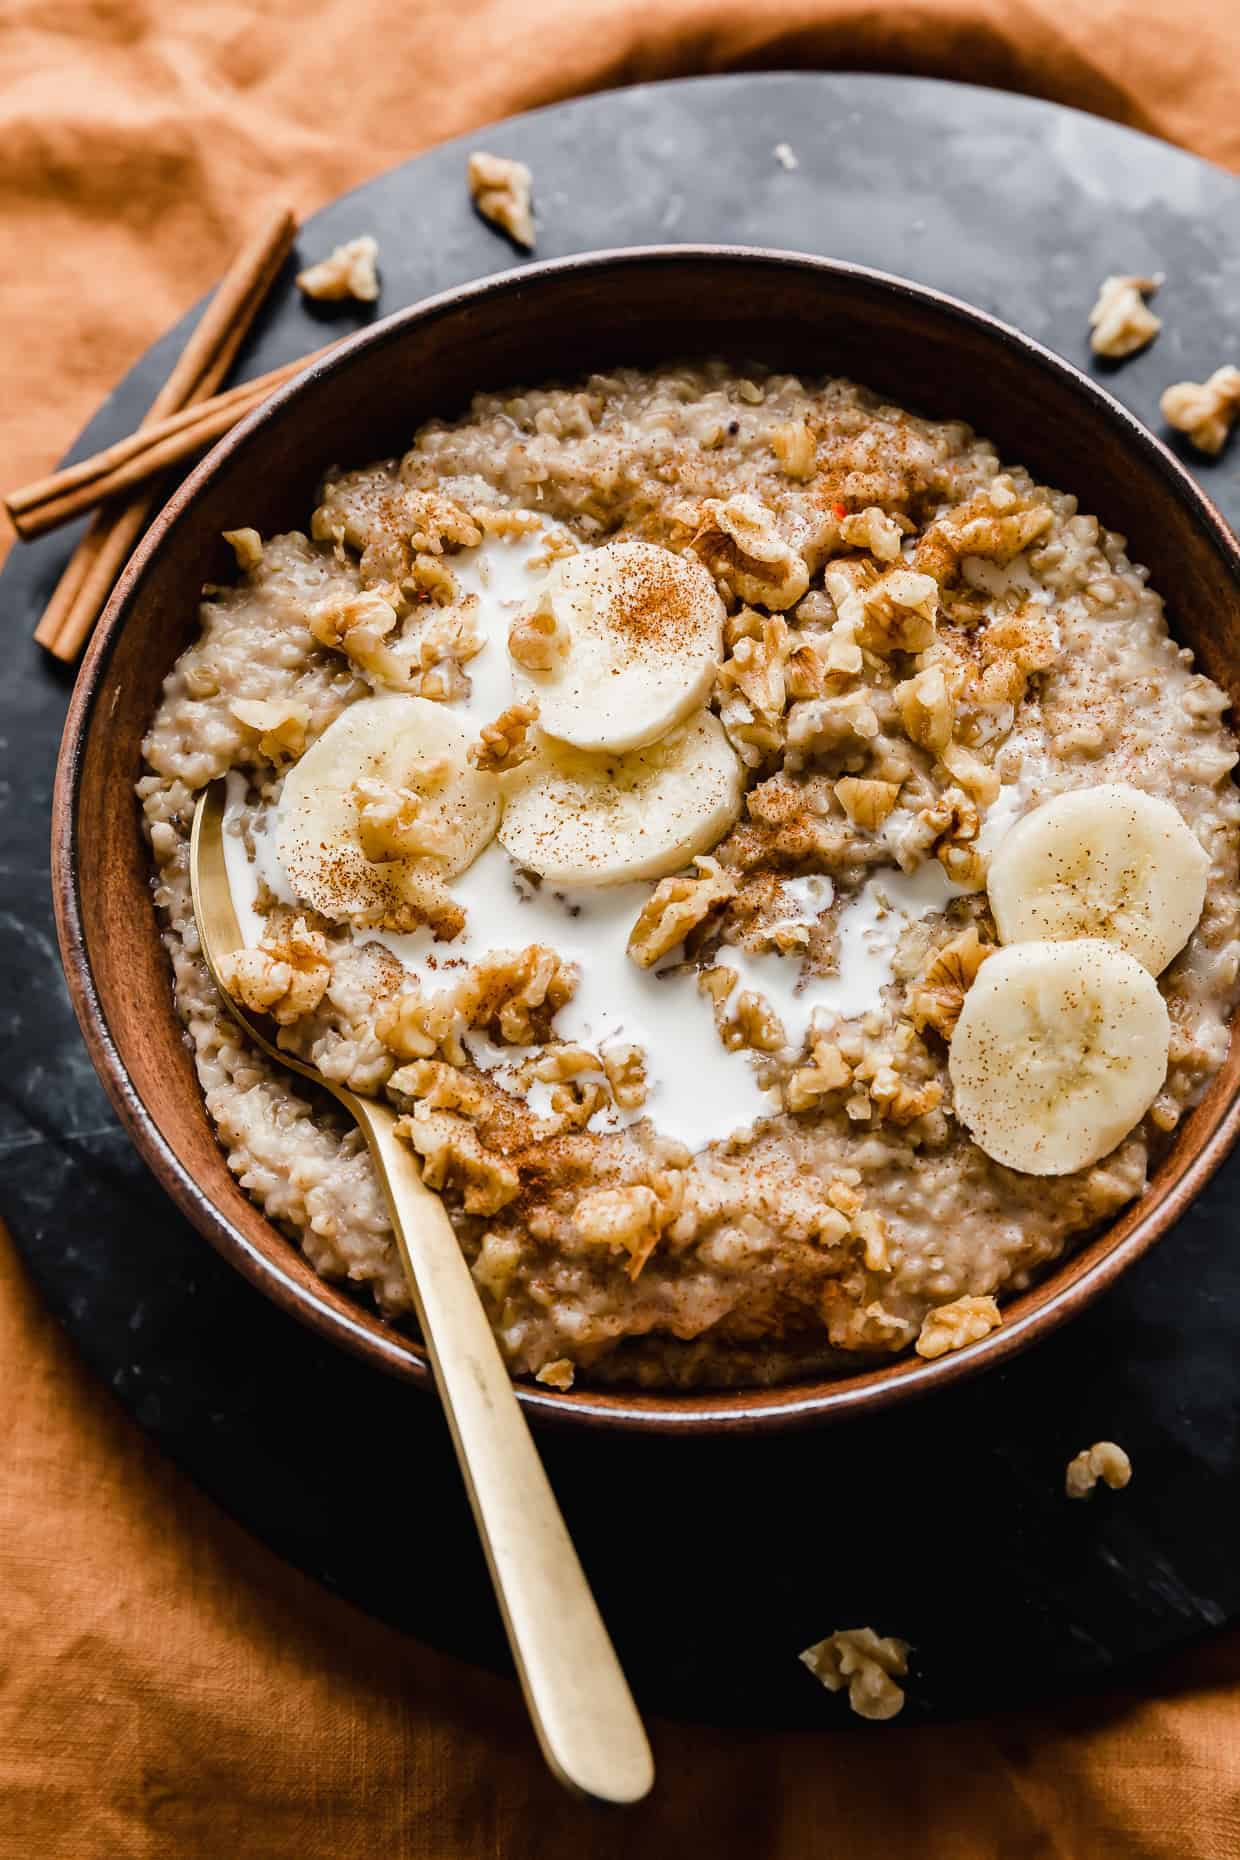 A wooden bowl full of Banana Steel Cut Oats topped with sliced bananas and walnuts against a black background.